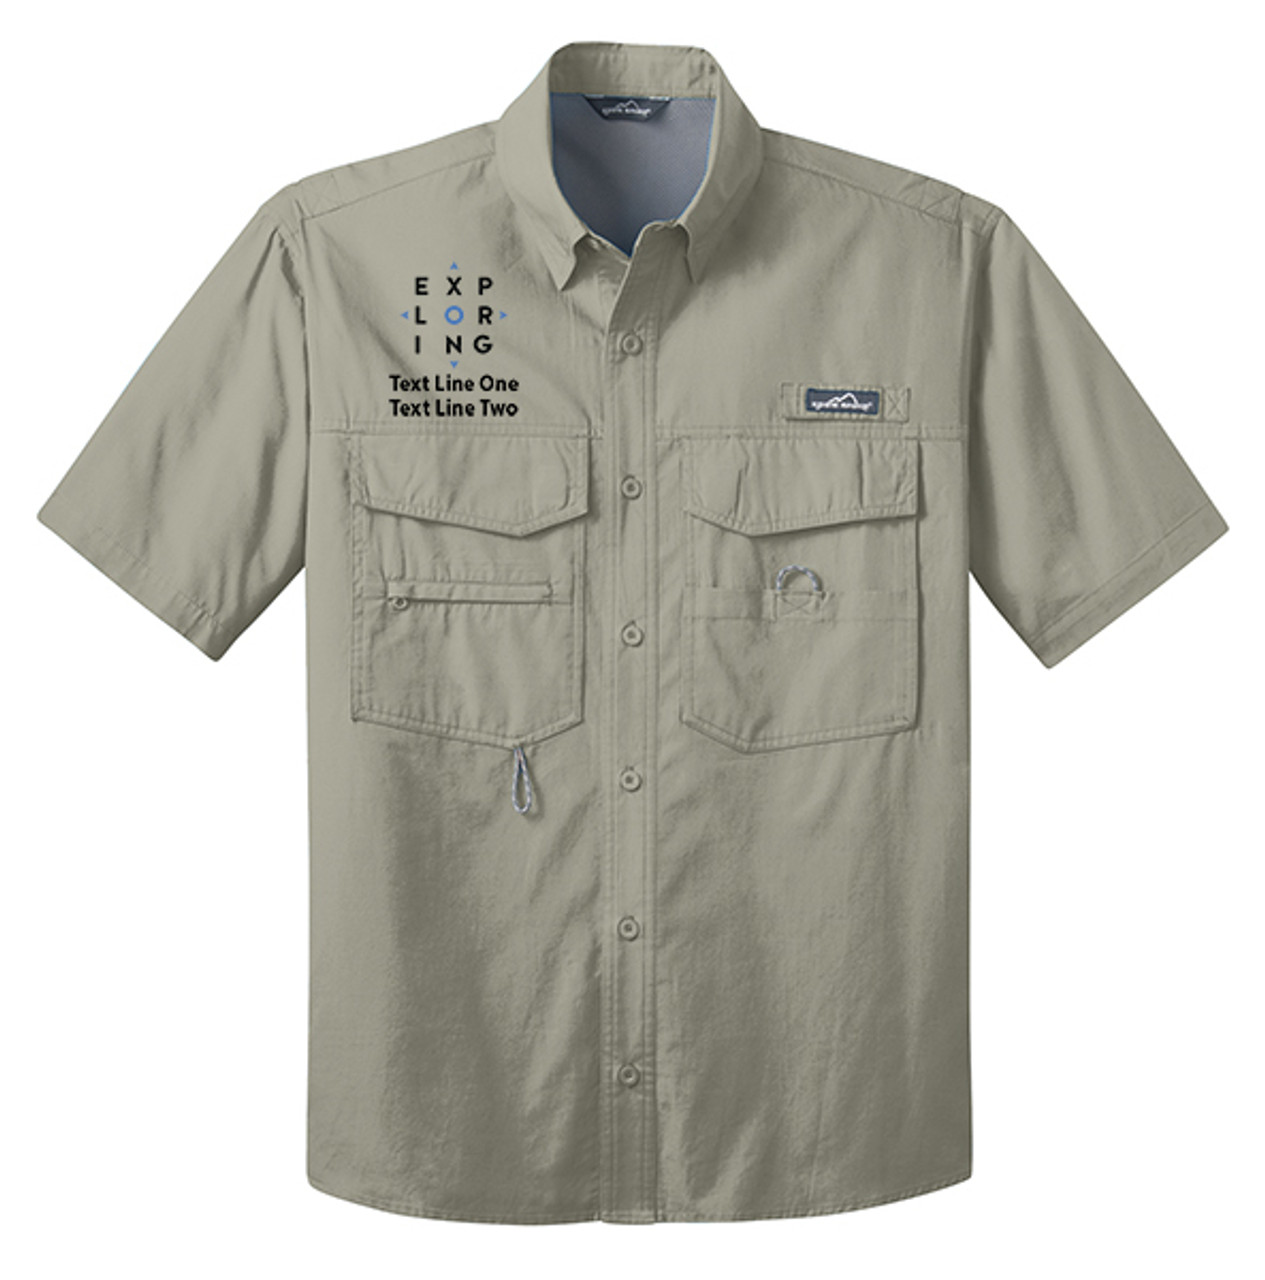 Short Sleeve Fishing Shirt with Embroidered Exploring Logo